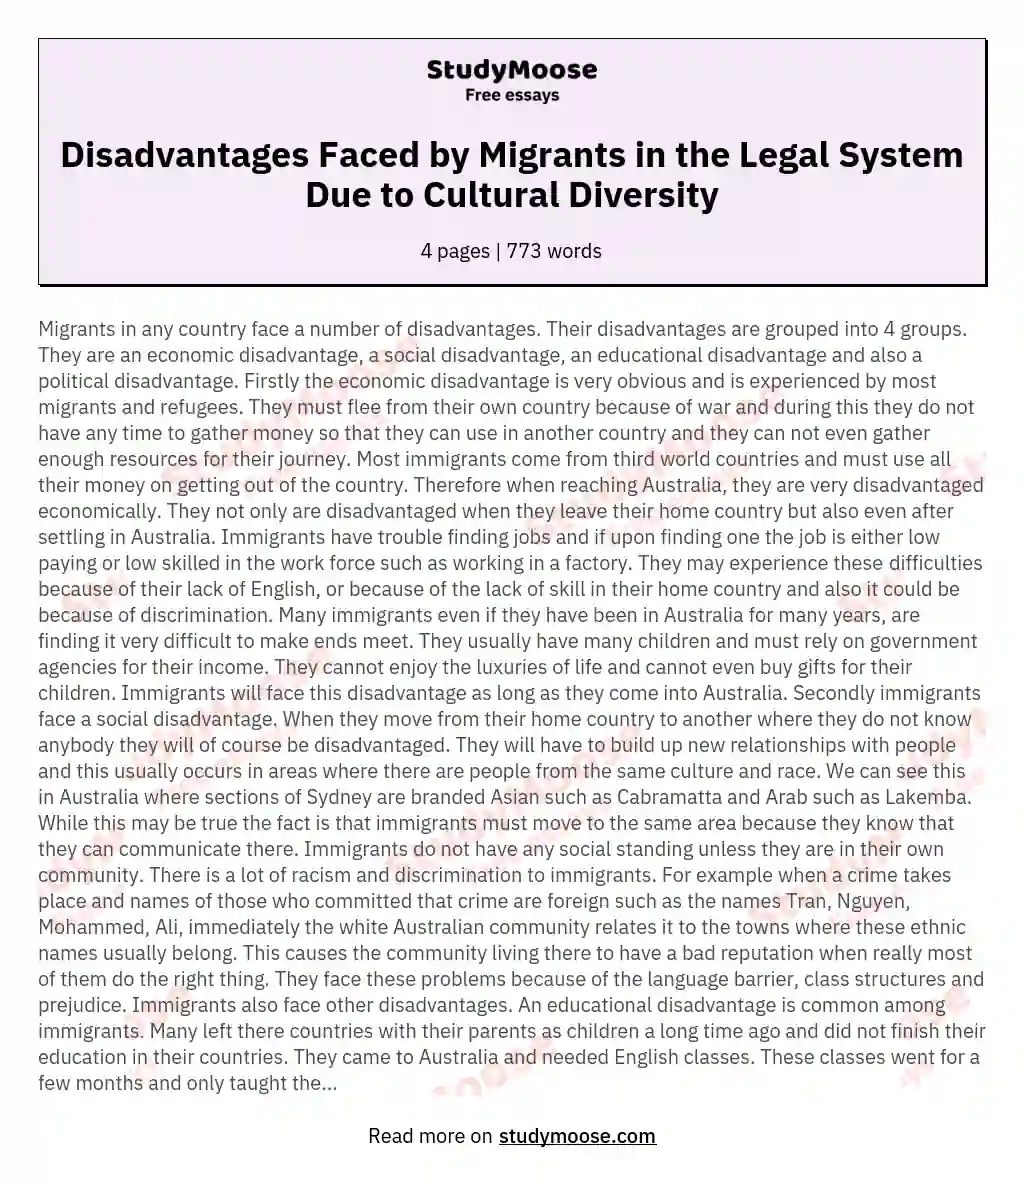 Disadvantages Faced by Migrants in the Legal System Due to Cultural Diversity essay